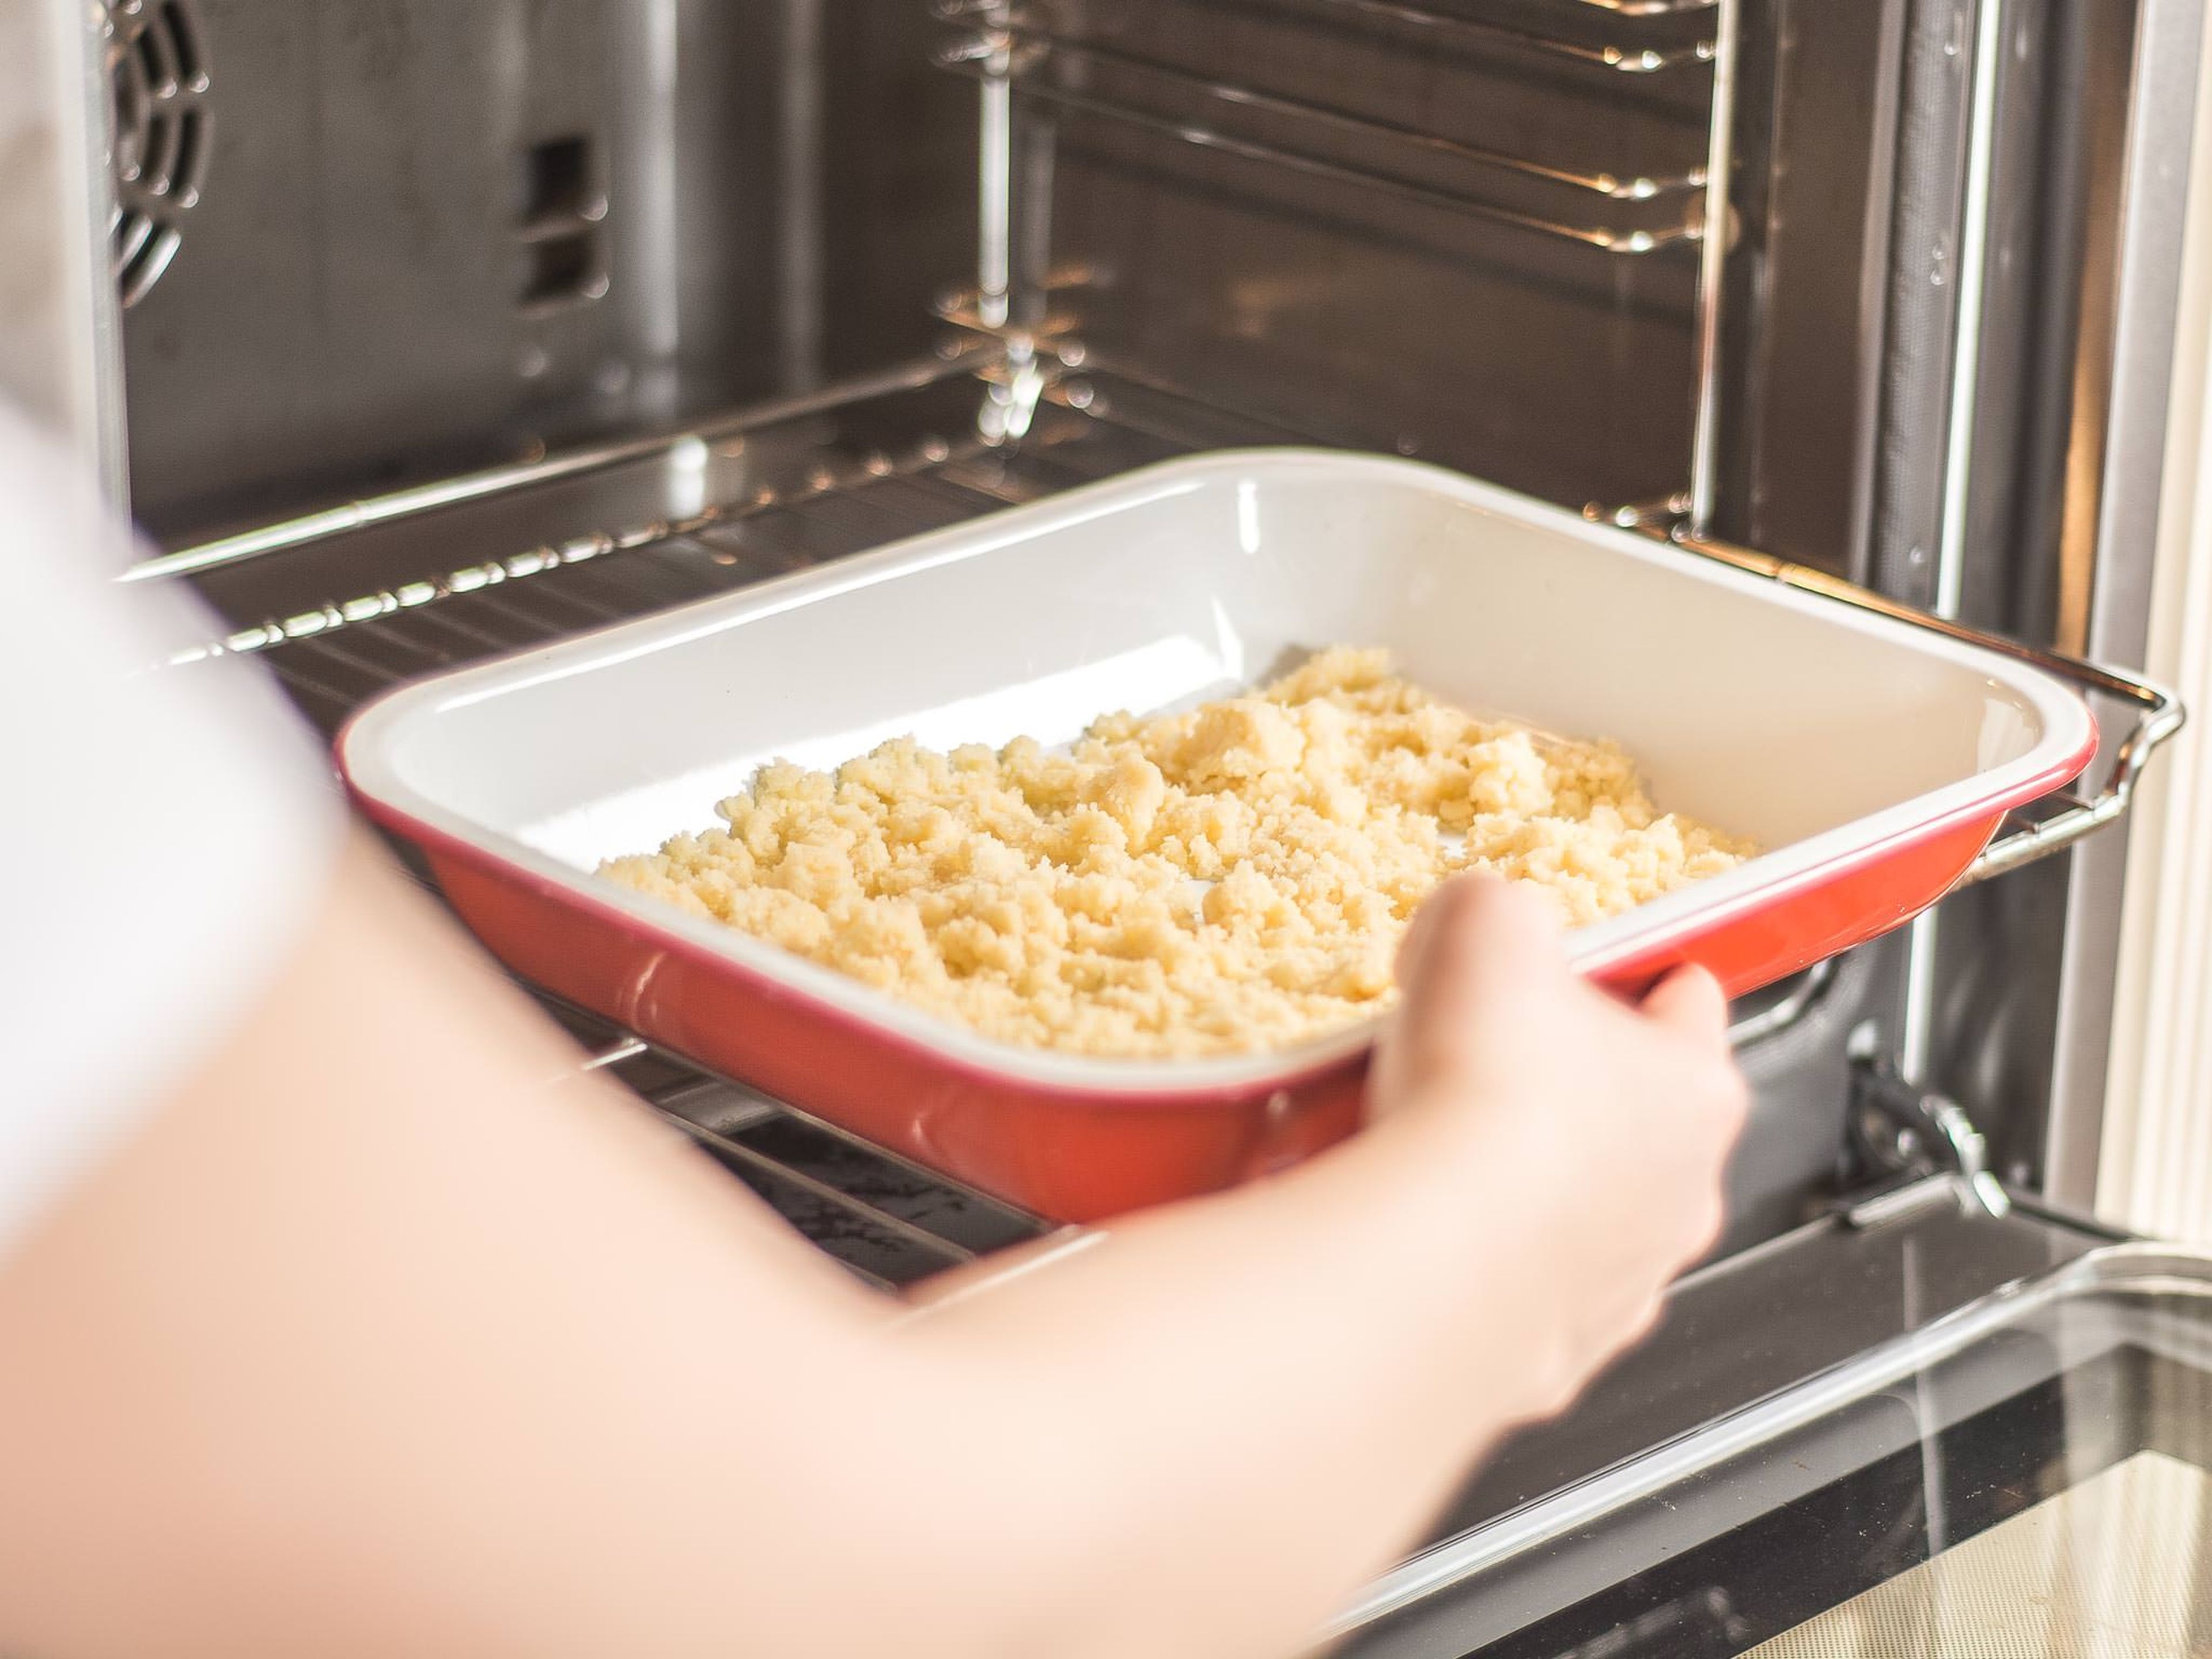 Put buttery crumbles into a baking dish or on a baking tray with baking paper. Bake in a preheated oven at 160°C/ 320°F for approx. 8 - 10 min. until crispy and golden.